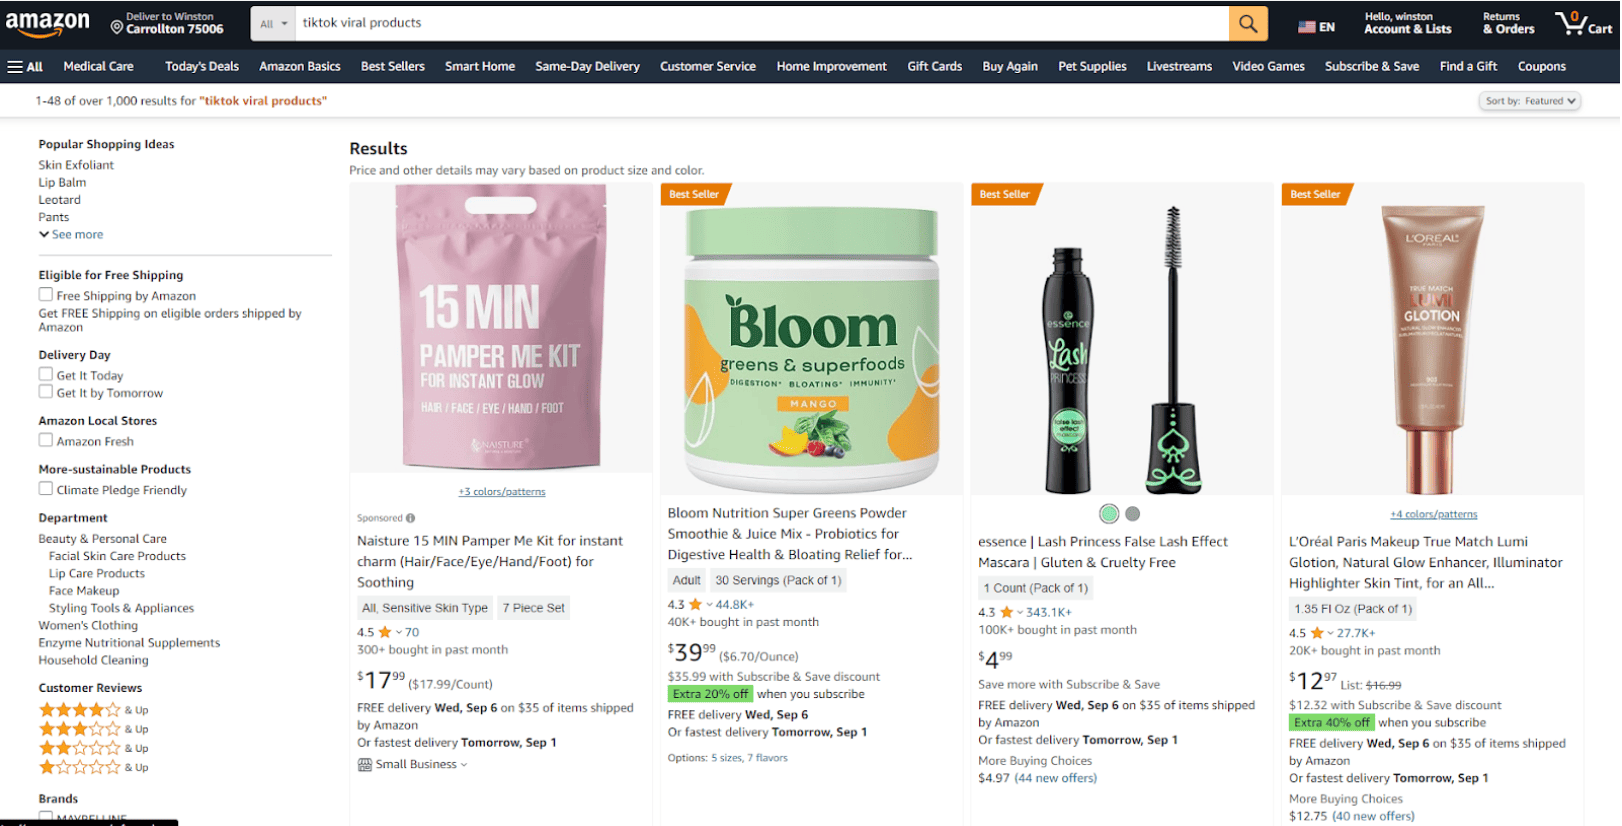 The Amazon product page that accrues relevant links